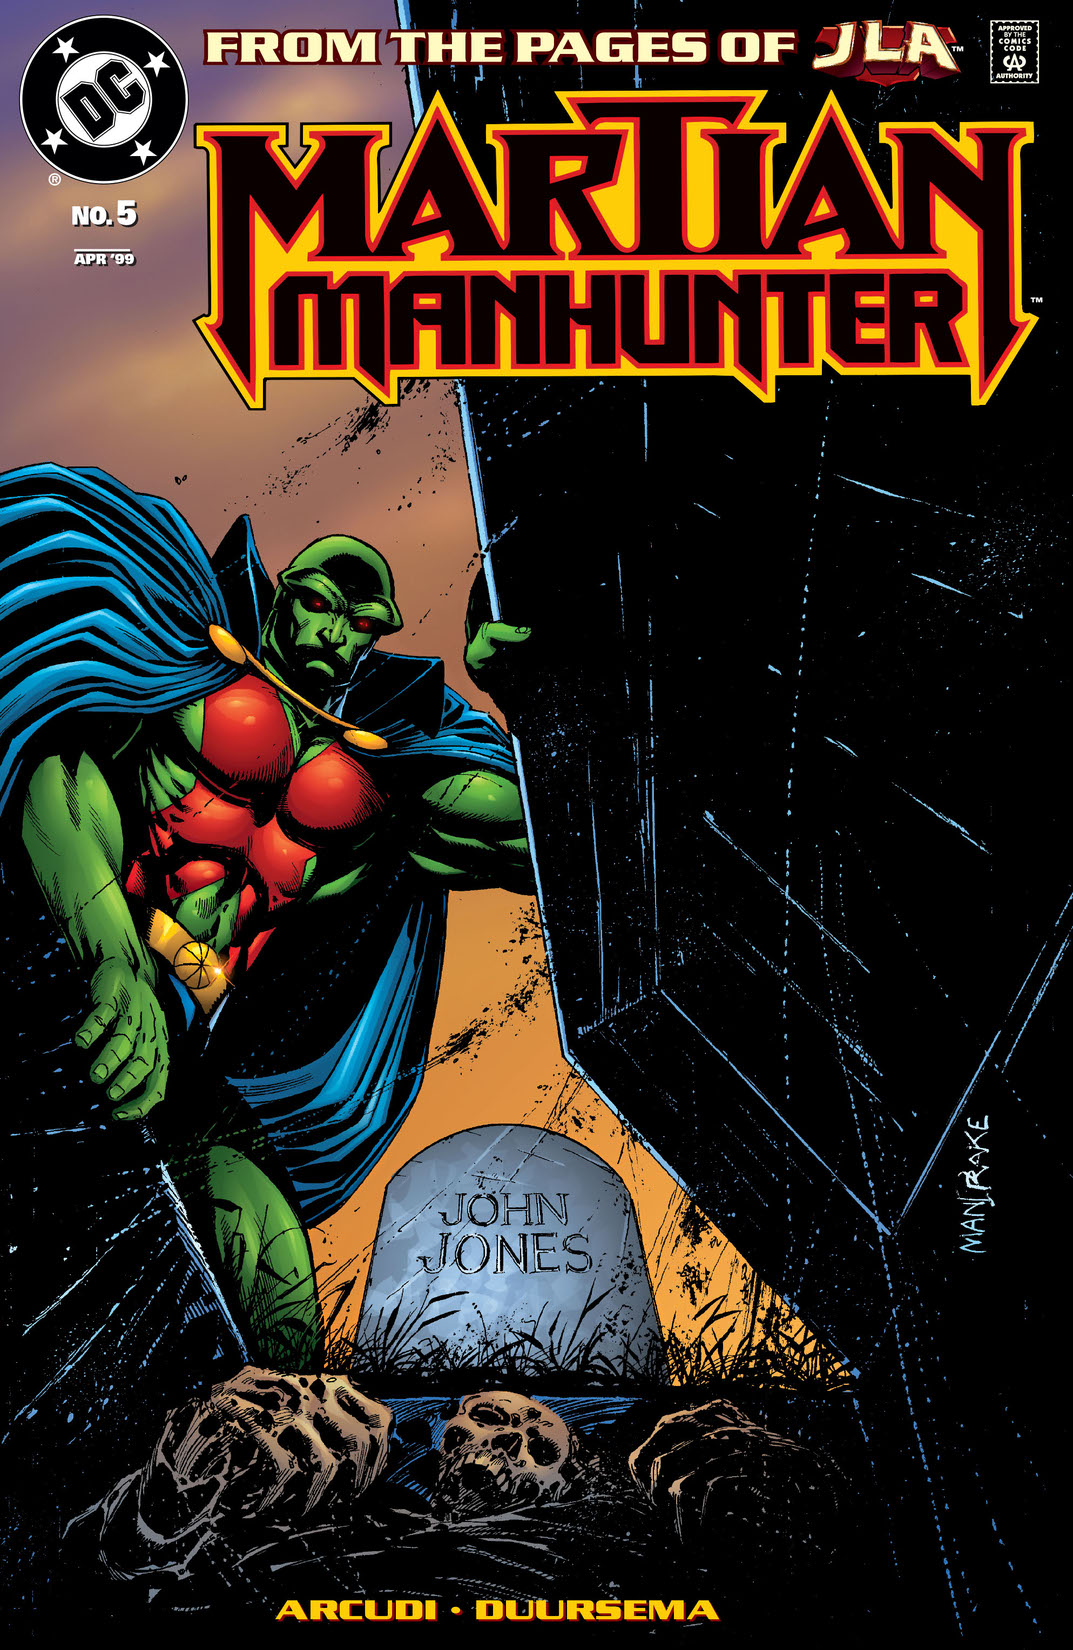 Martian Manhunter (1998-) #5 preview images